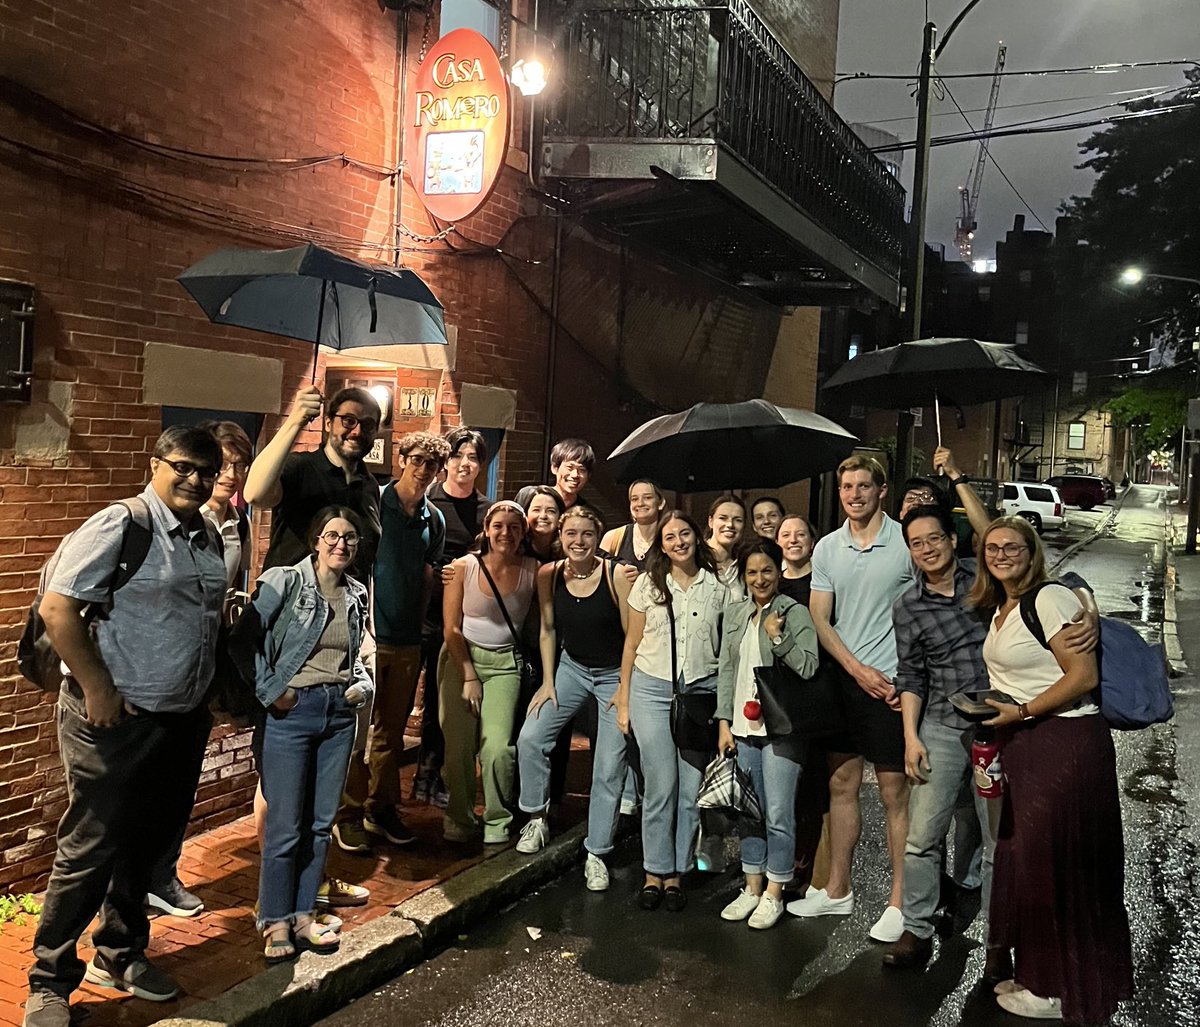 CICS Team Spirit: It was a hot and stormy night but CICS members still made it out to bid farewell to Katie. We wish her all the best!